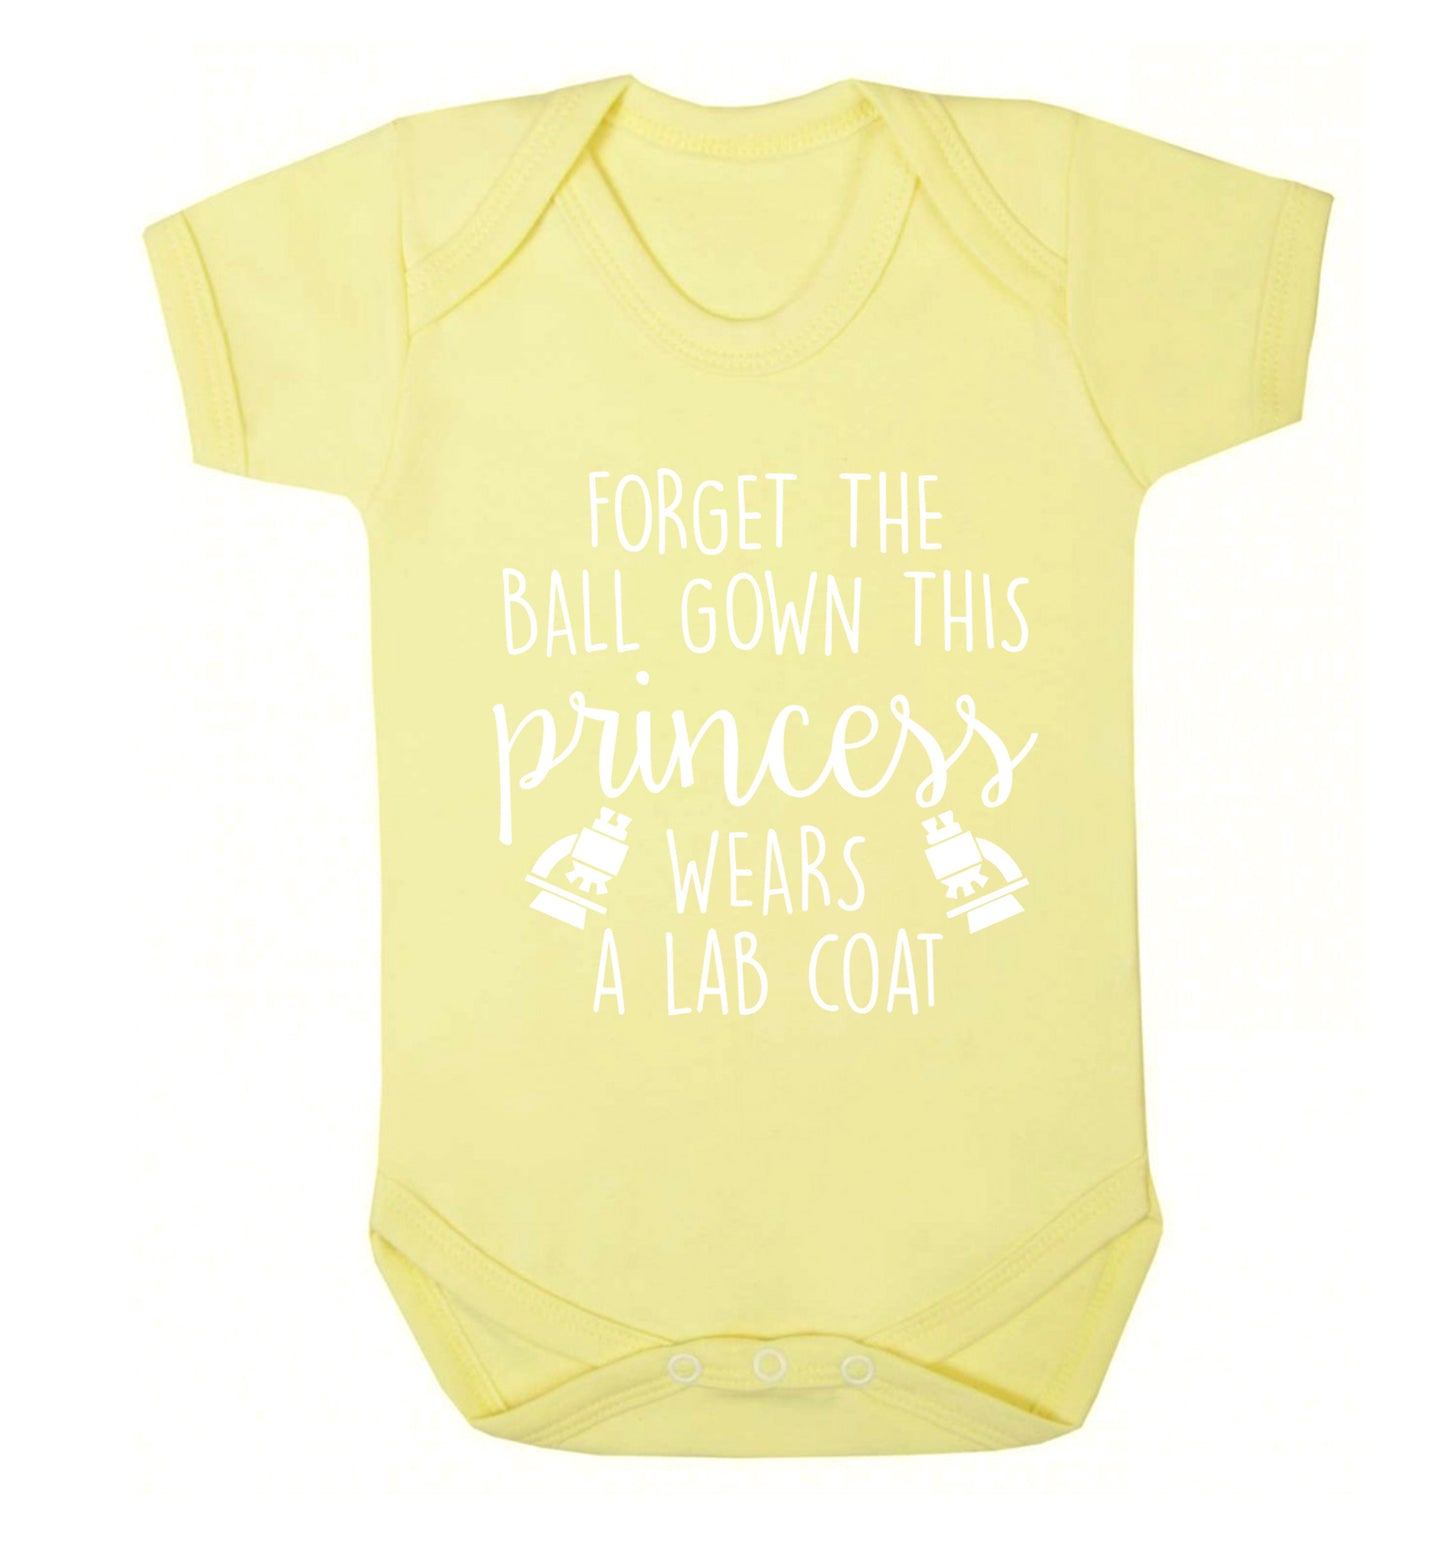 Forget the ball gown this princess wears a lab coat Baby Vest pale yellow 18-24 months